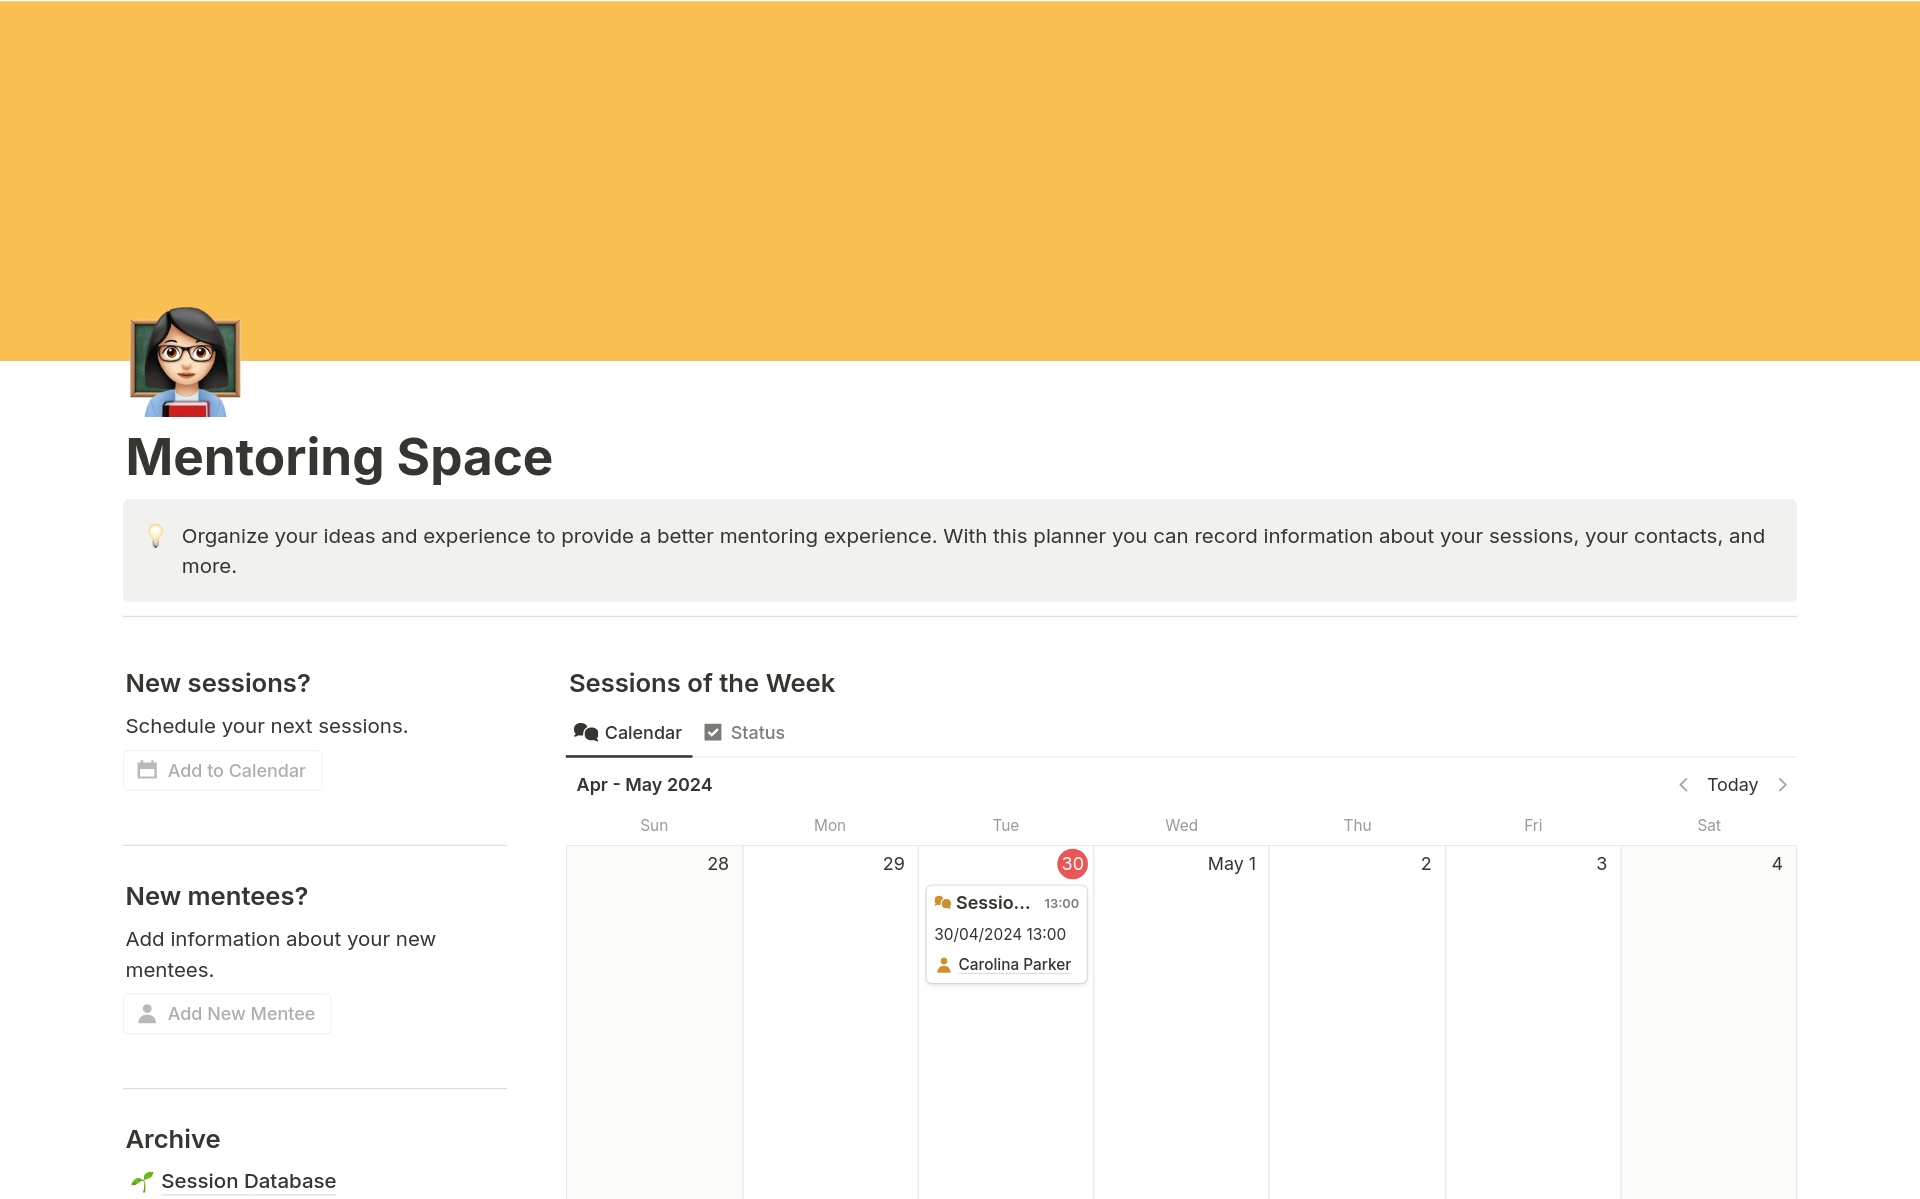 With this tool, you can organize your mentoring sessions like a pro!